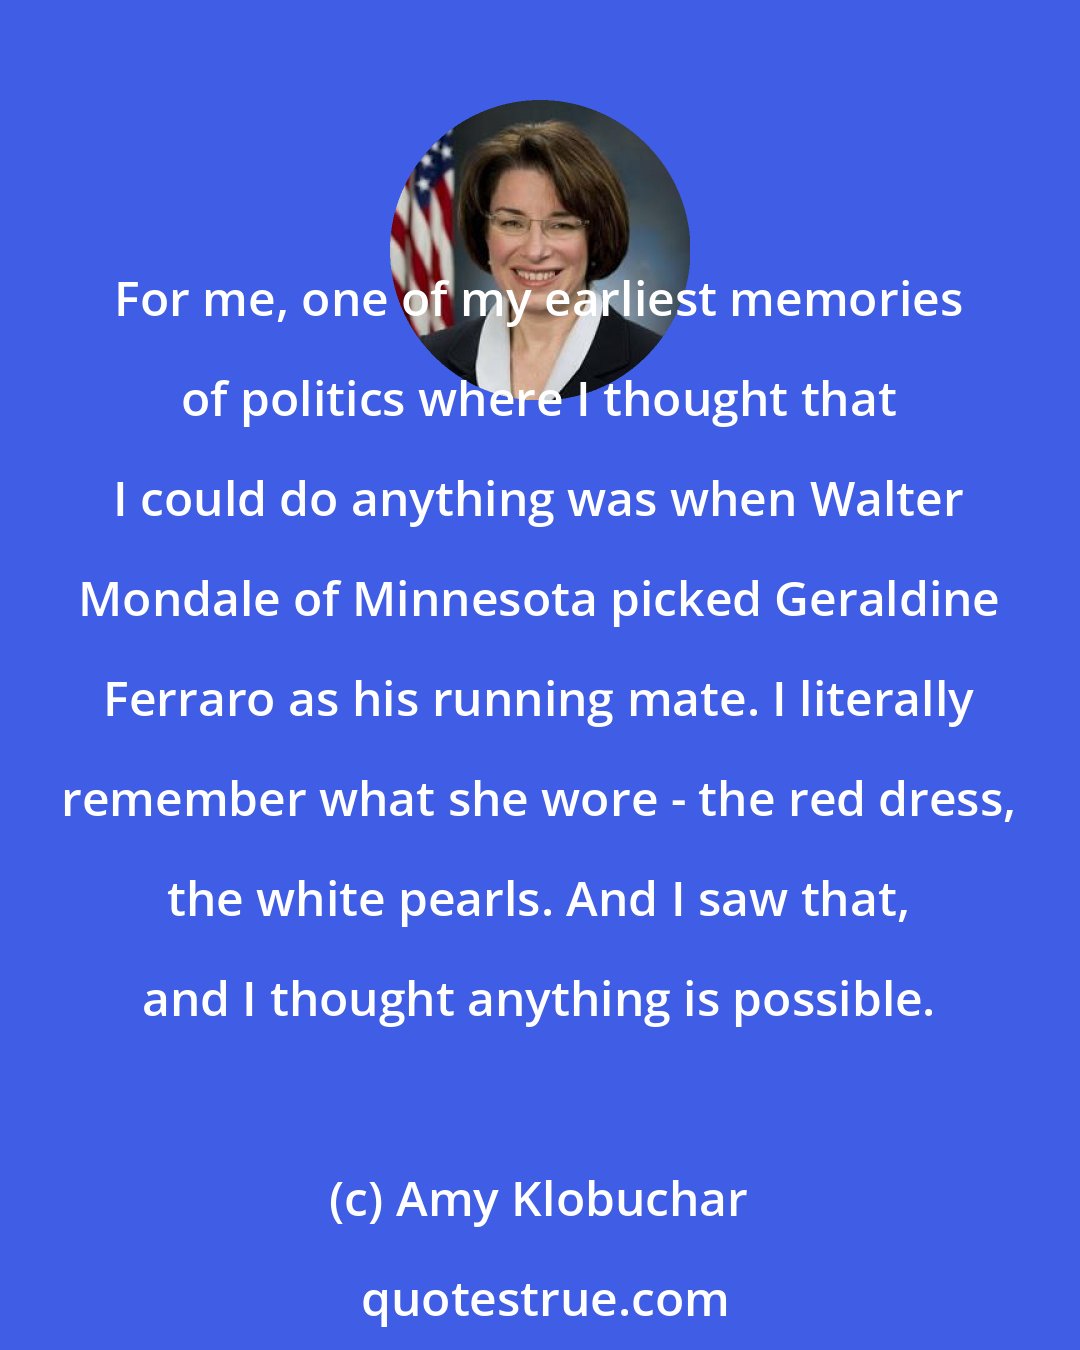 Amy Klobuchar: For me, one of my earliest memories of politics where I thought that I could do anything was when Walter Mondale of Minnesota picked Geraldine Ferraro as his running mate. I literally remember what she wore - the red dress, the white pearls. And I saw that, and I thought anything is possible.